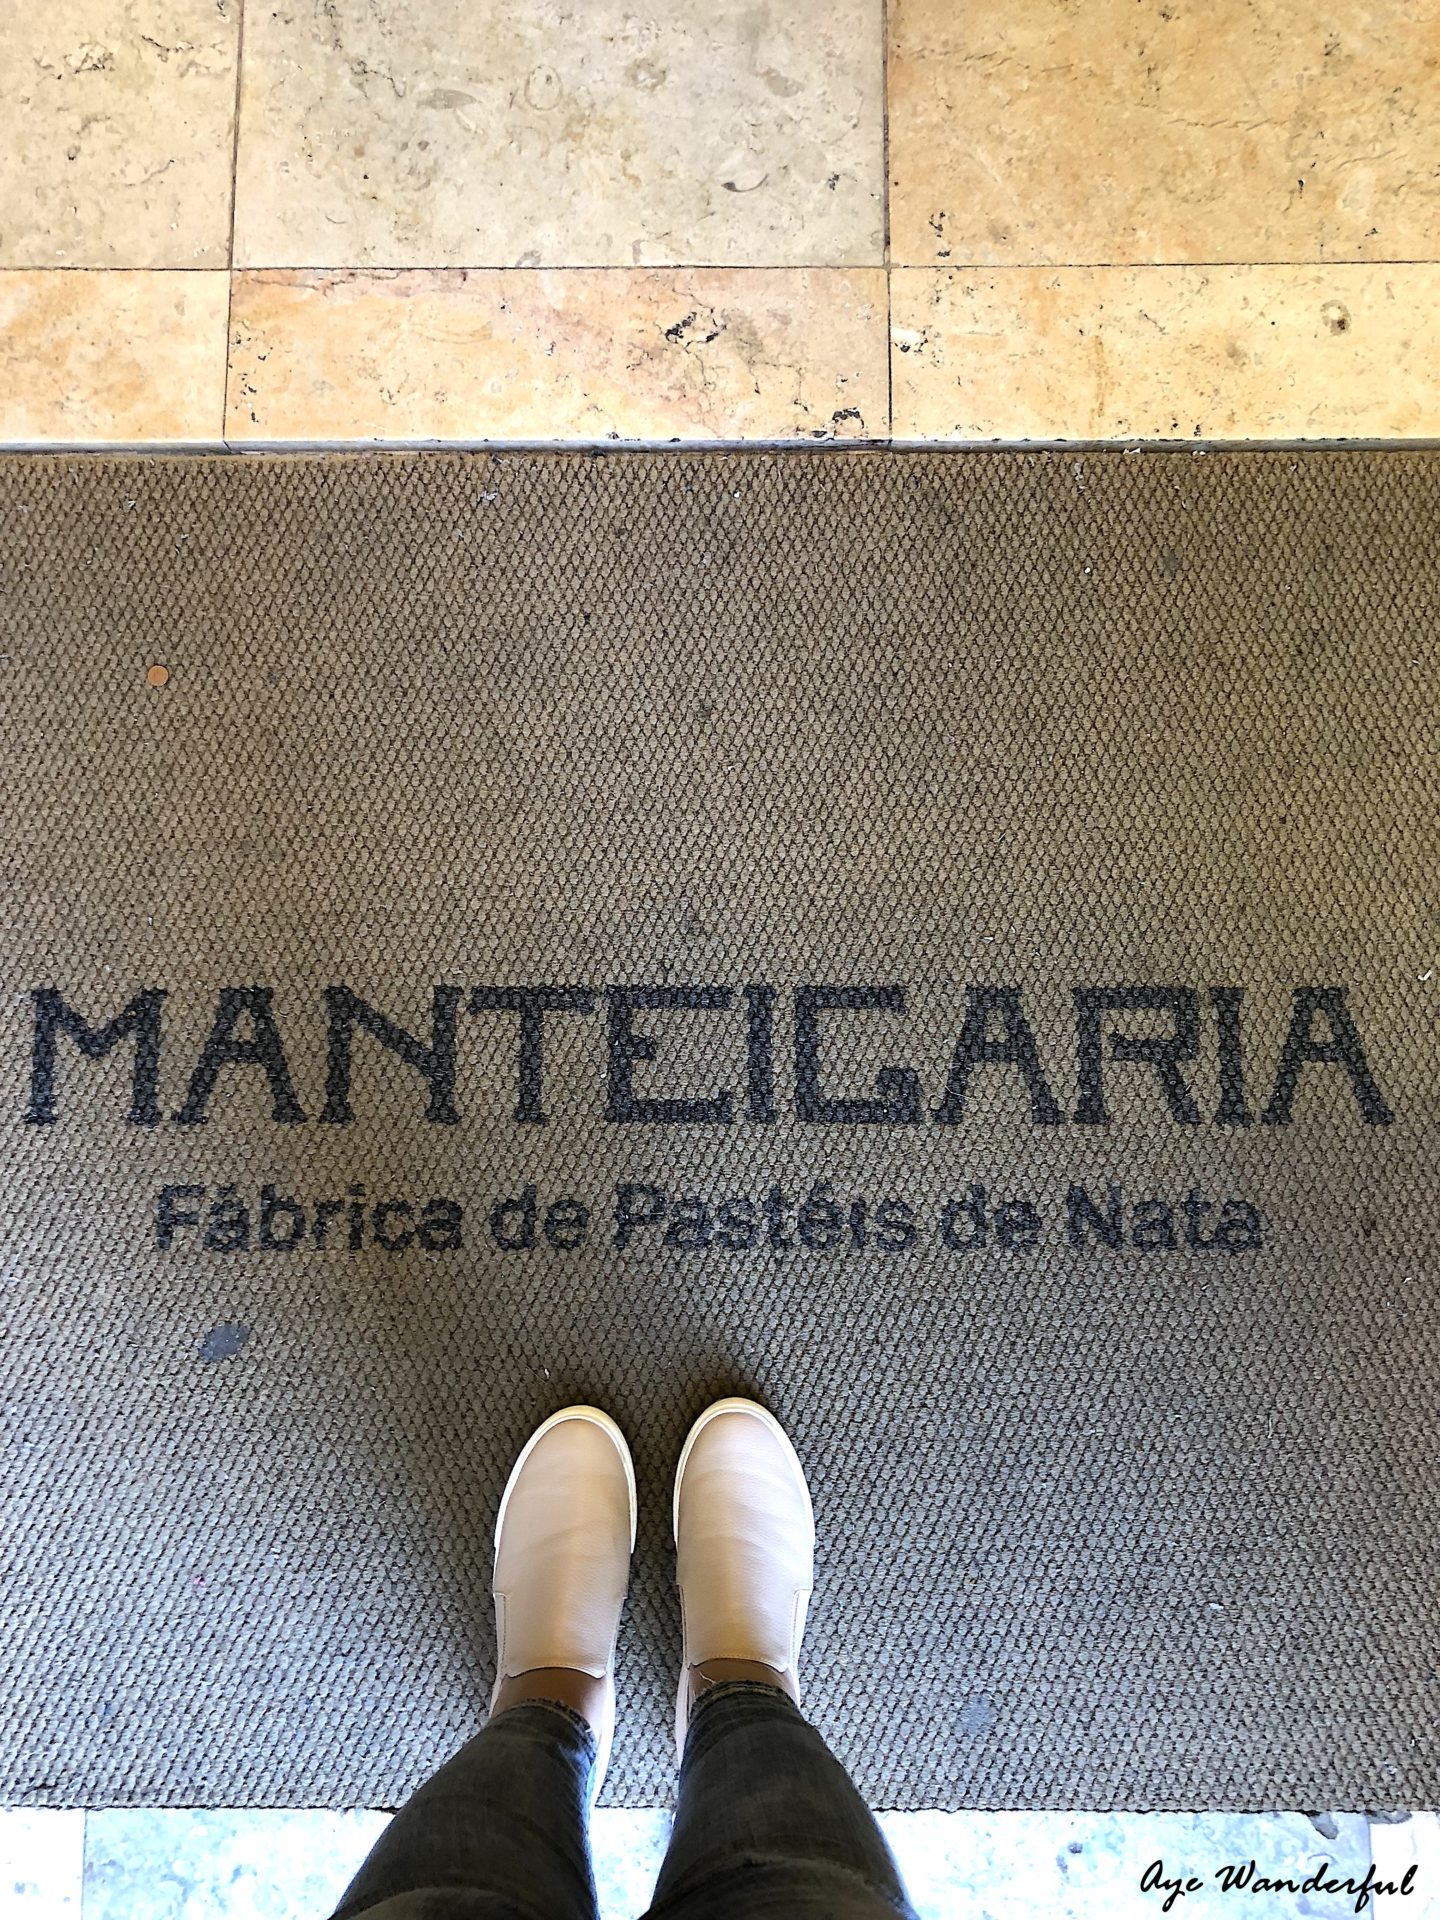 Manteigaria Bakery | 8 hours in Lisbon